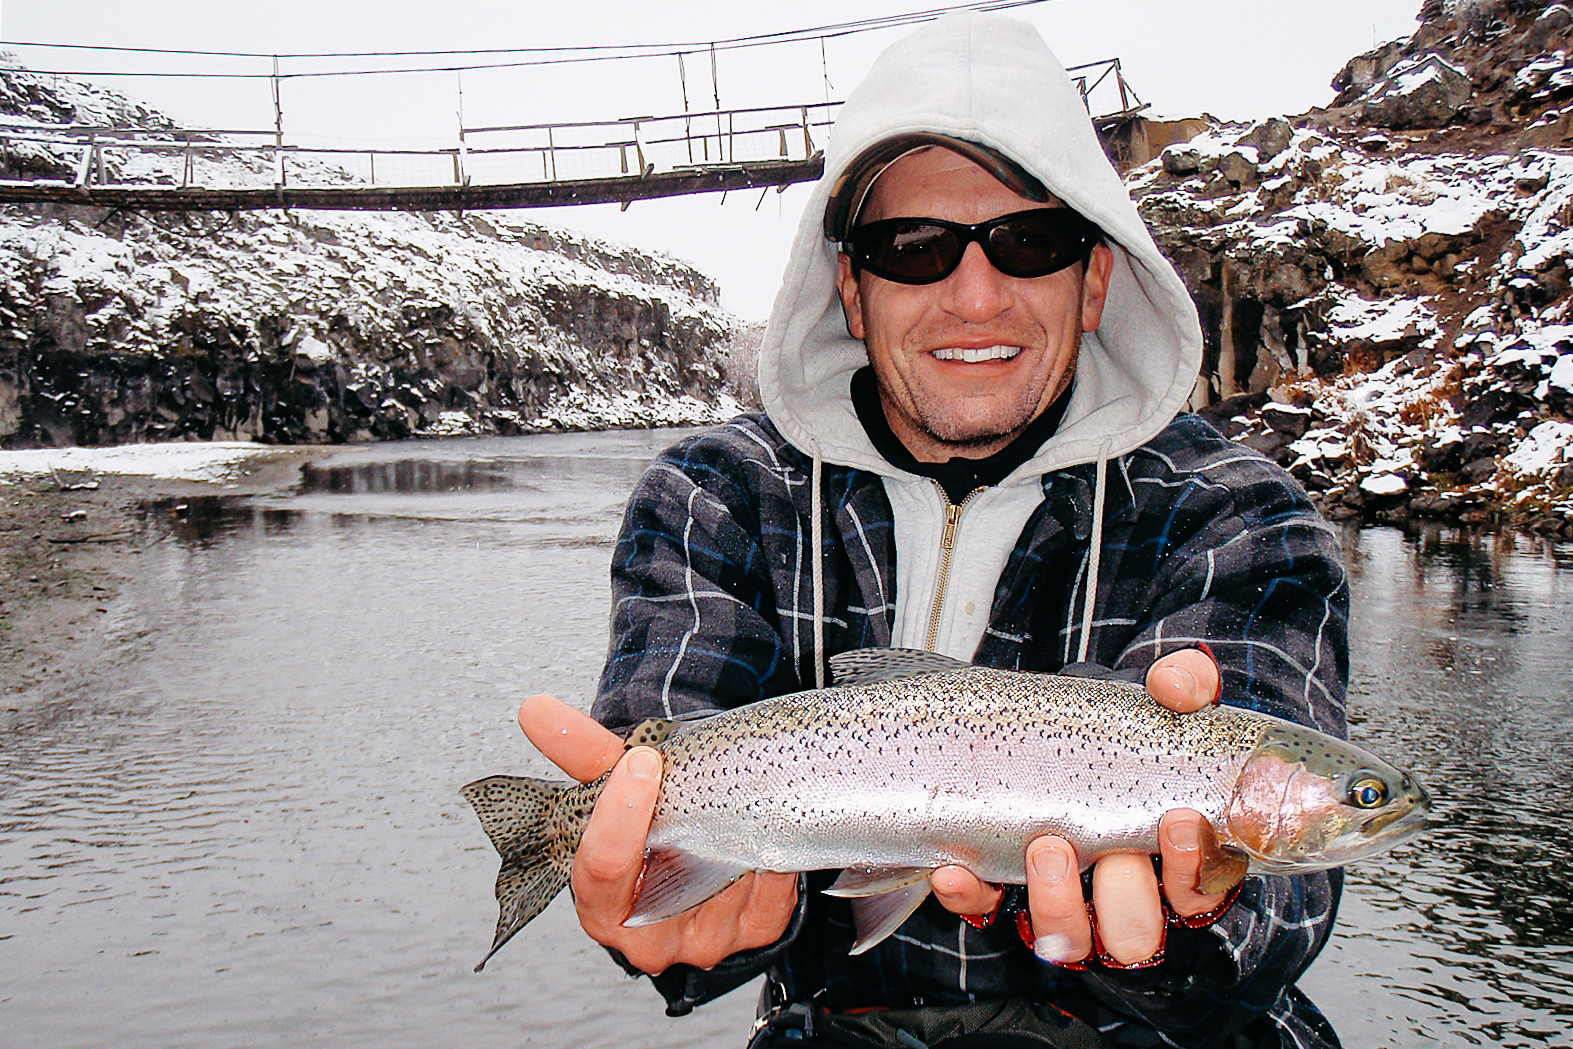 Winter Trout Fishing: 4 Easy Ways To Catch More Fish - Wild Outdoor